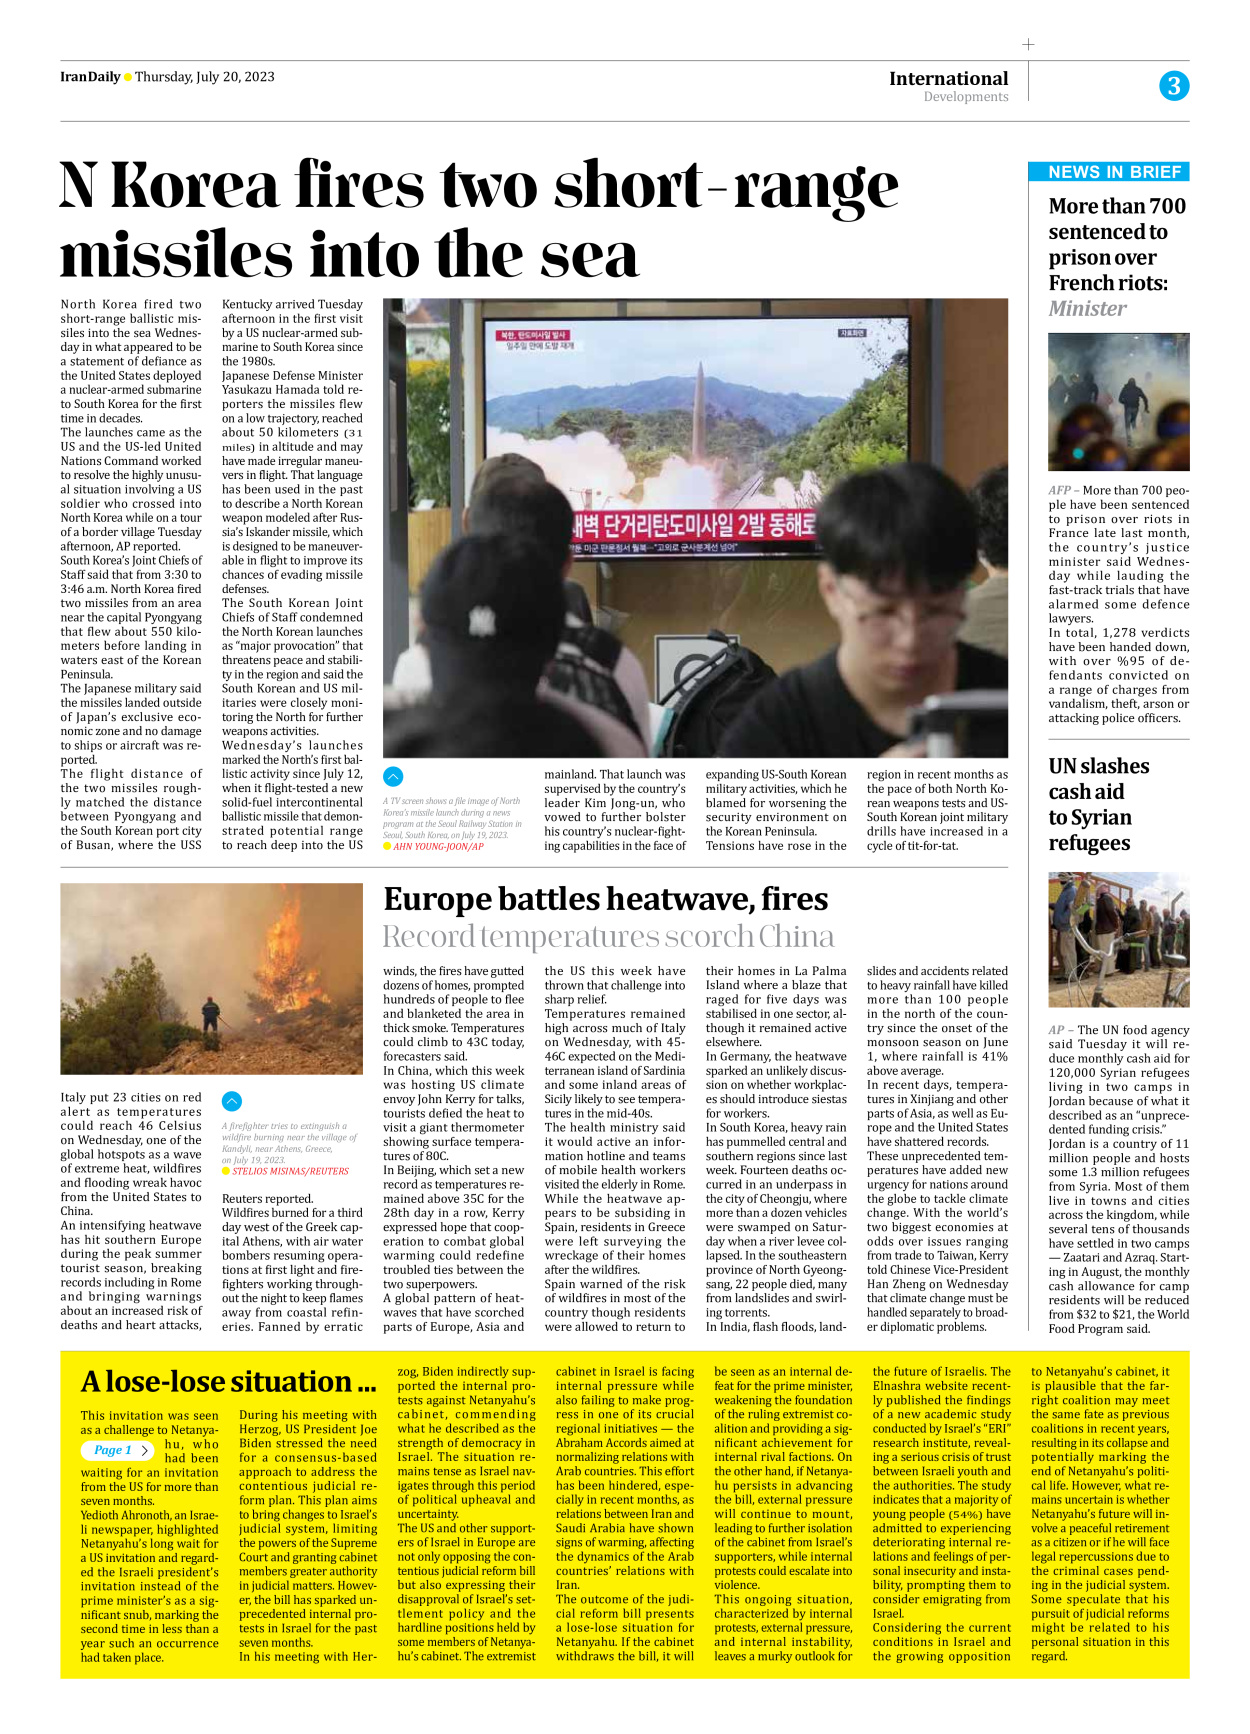 Iran Daily - Number Seven Thousand Three Hundred and Forty Four - 20 July 2023 - Page 3